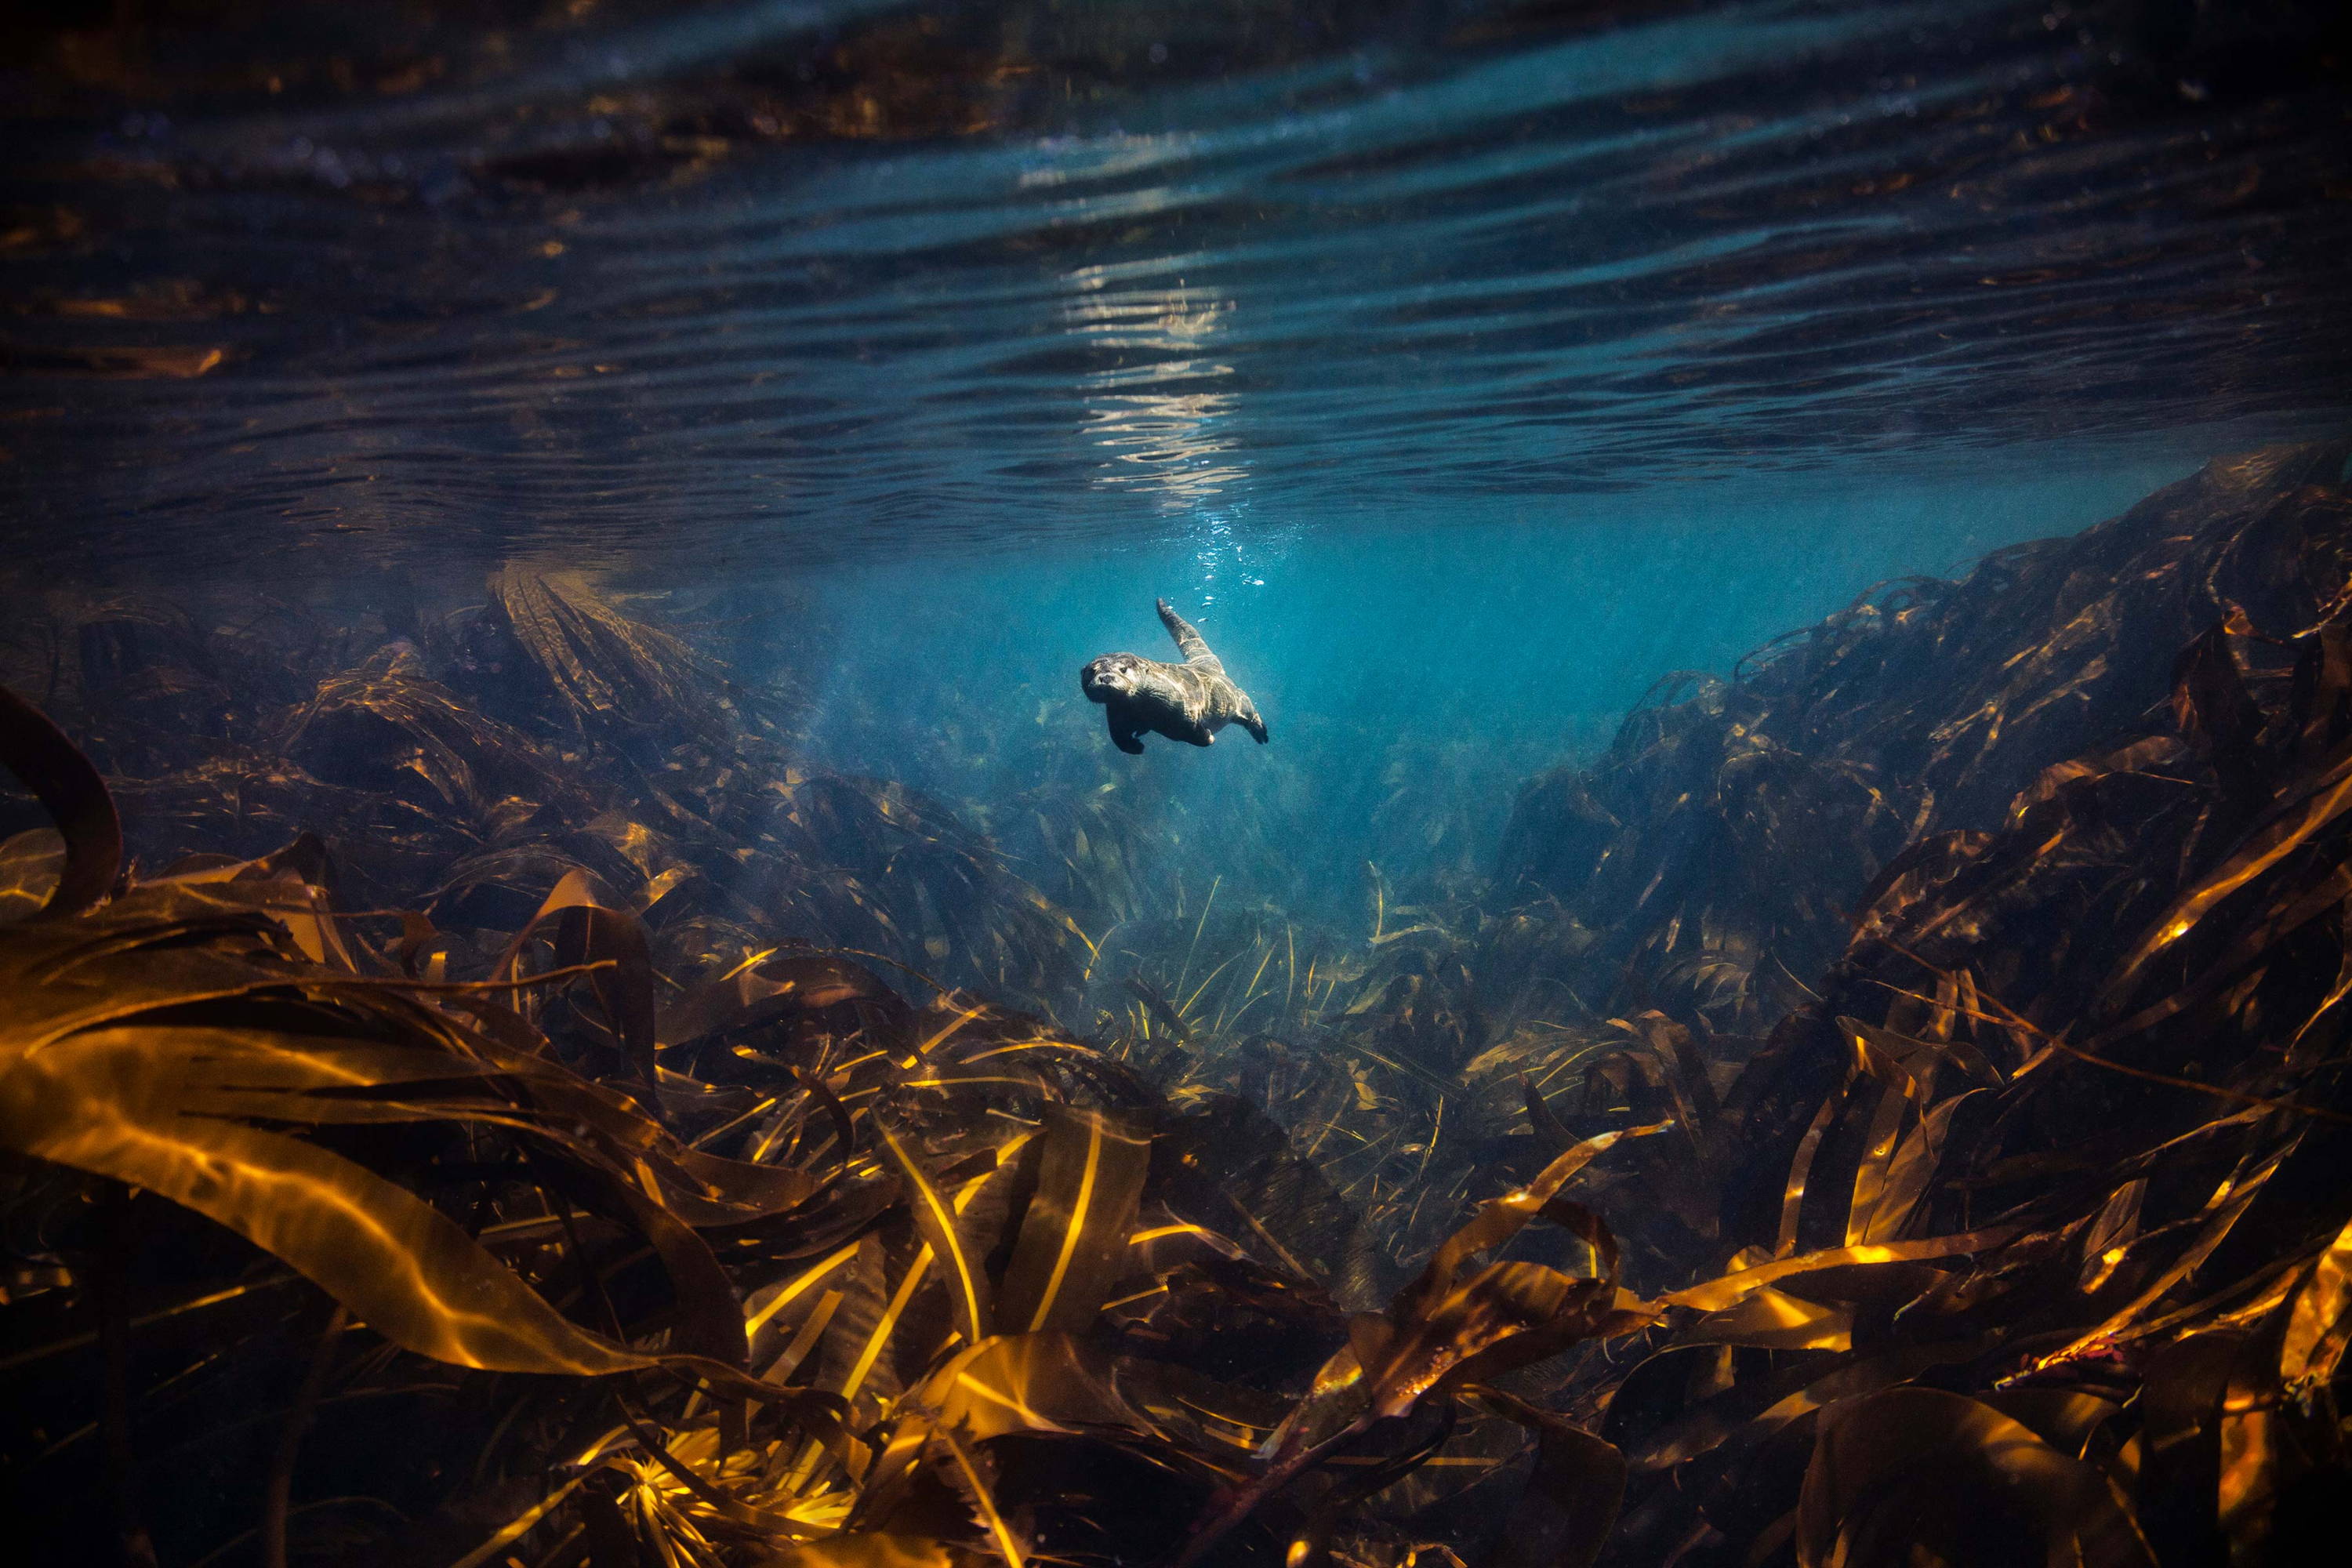 An otter swimming above a kelp forest